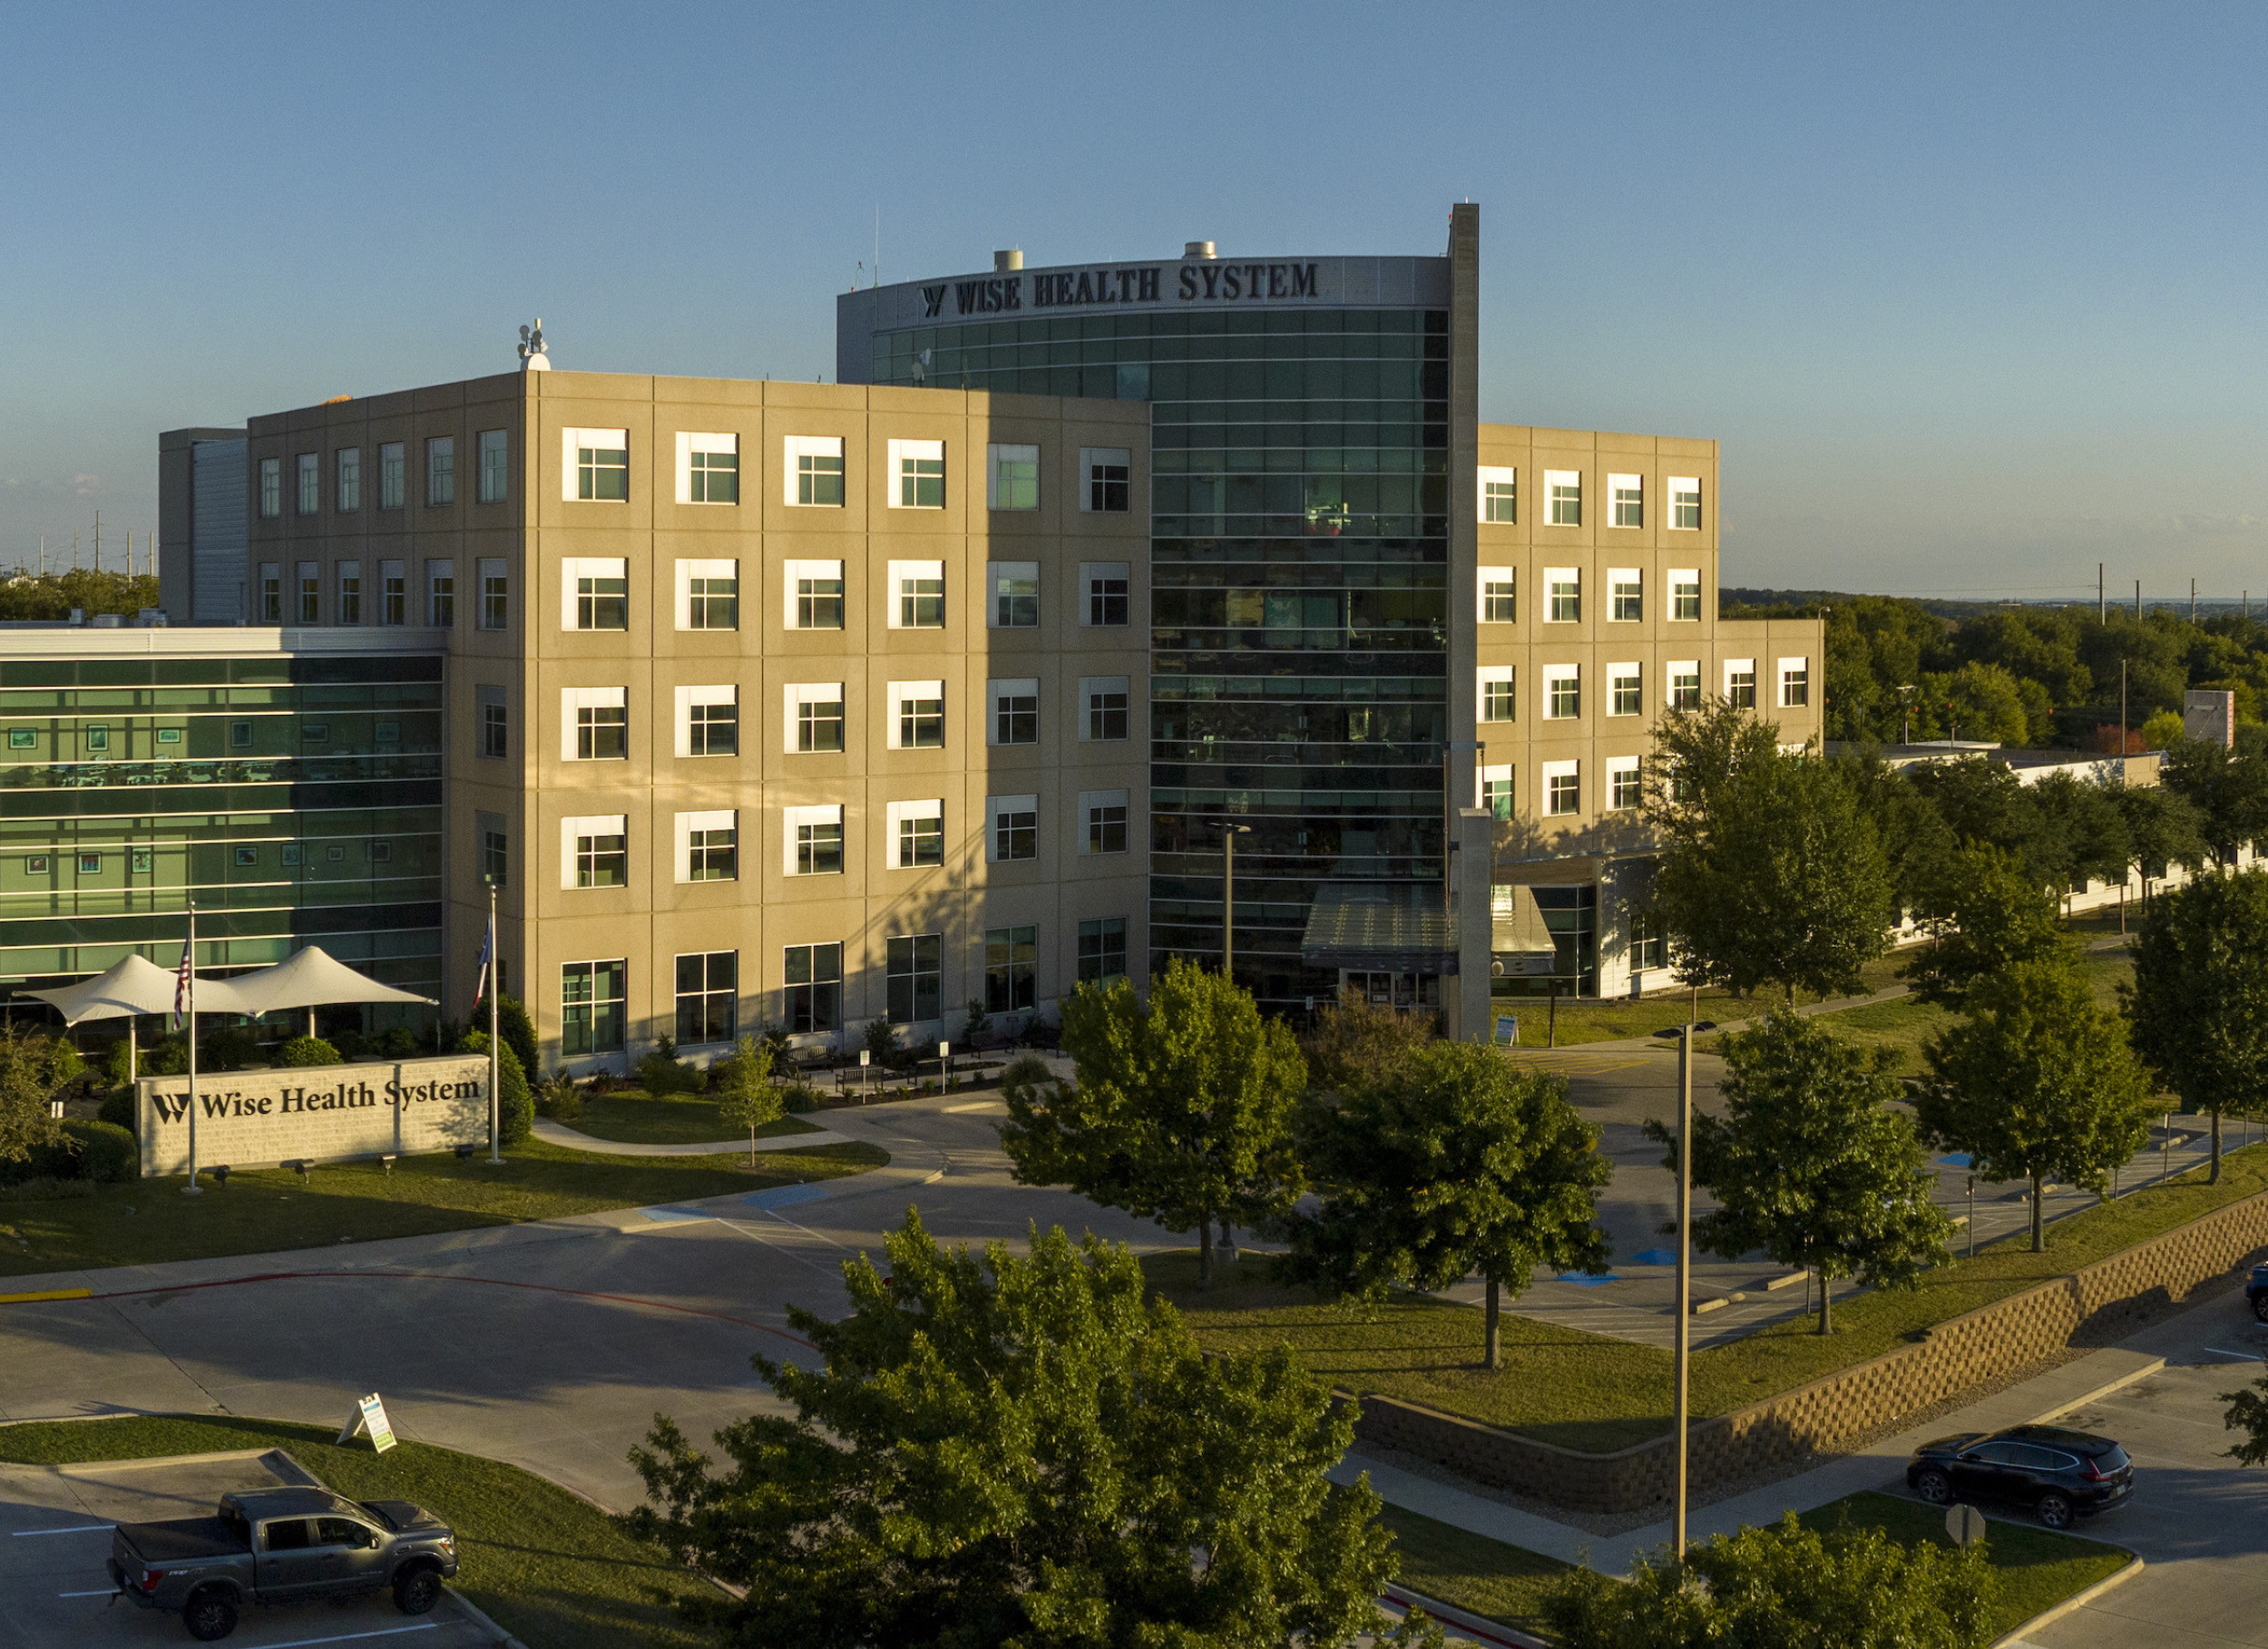 Wise Health System building